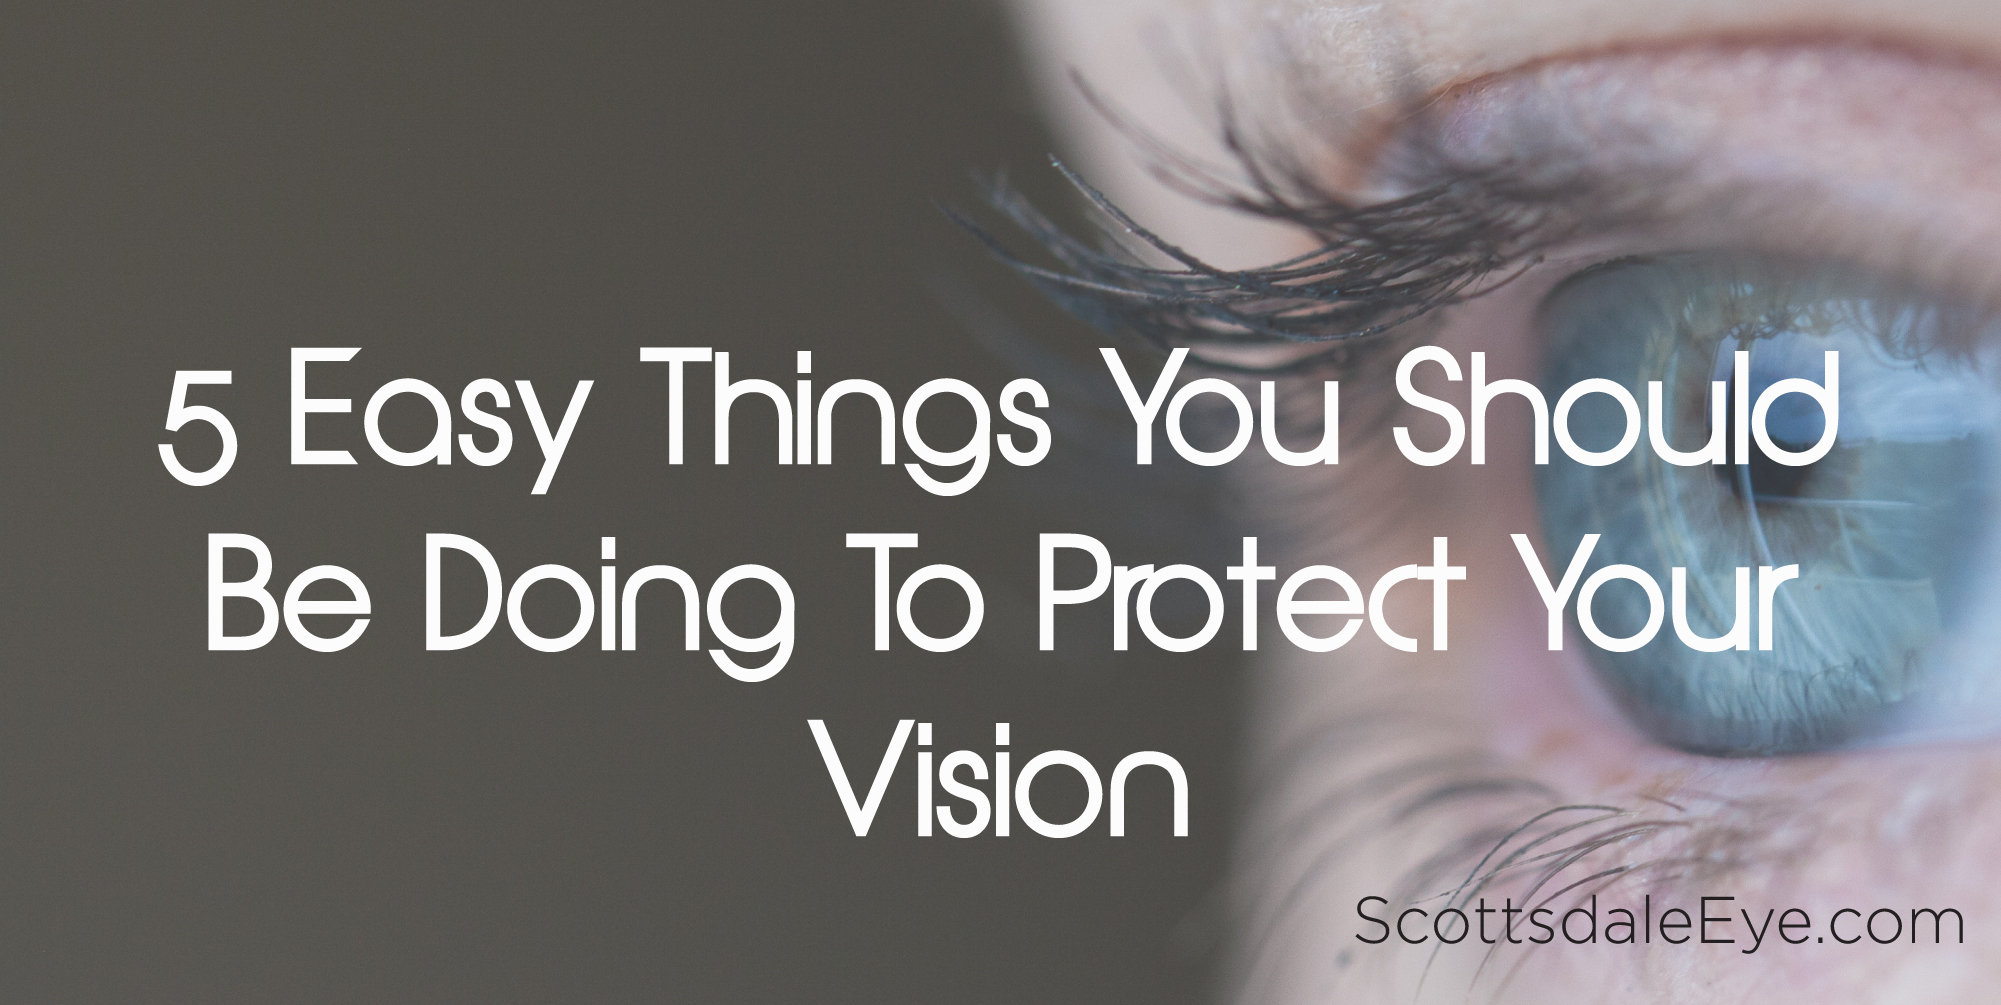 5 Easy Things You Should Be Doing To Protect Your Vision